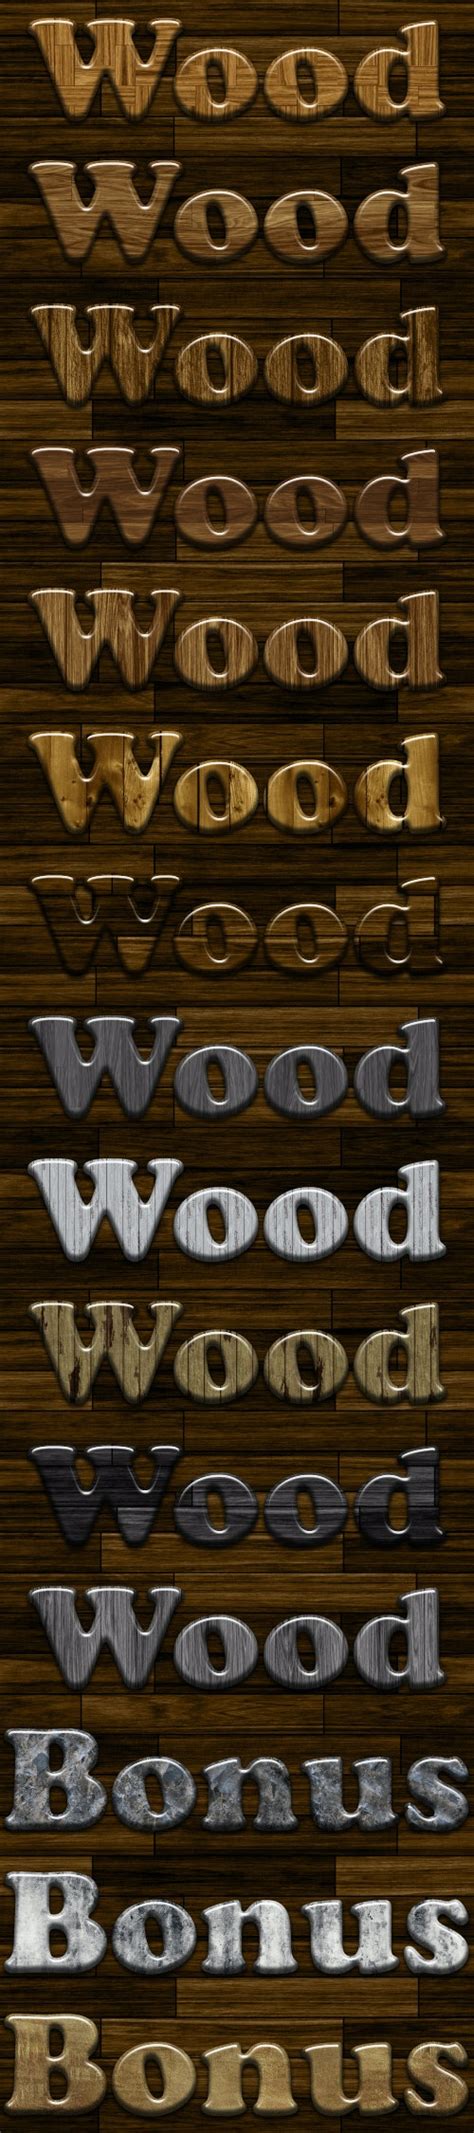 Glossy Wood Photoshop Styles V2 By Tiberiualexander Graphicriver